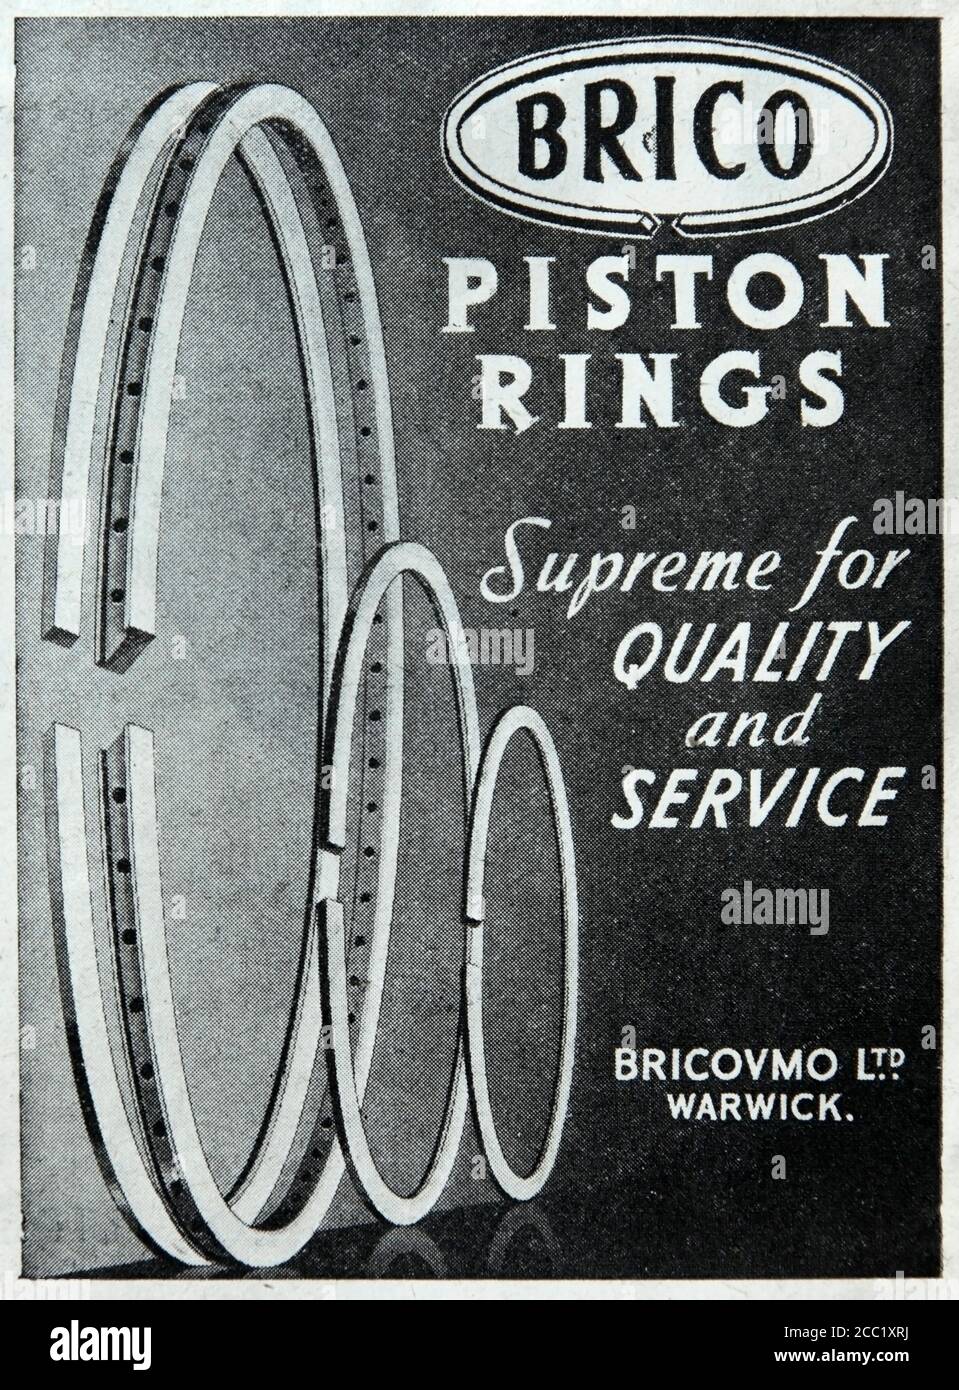 Vintage 1942 advertisement for British Brico piston rings as used in the aircraft industry. Stock Photo